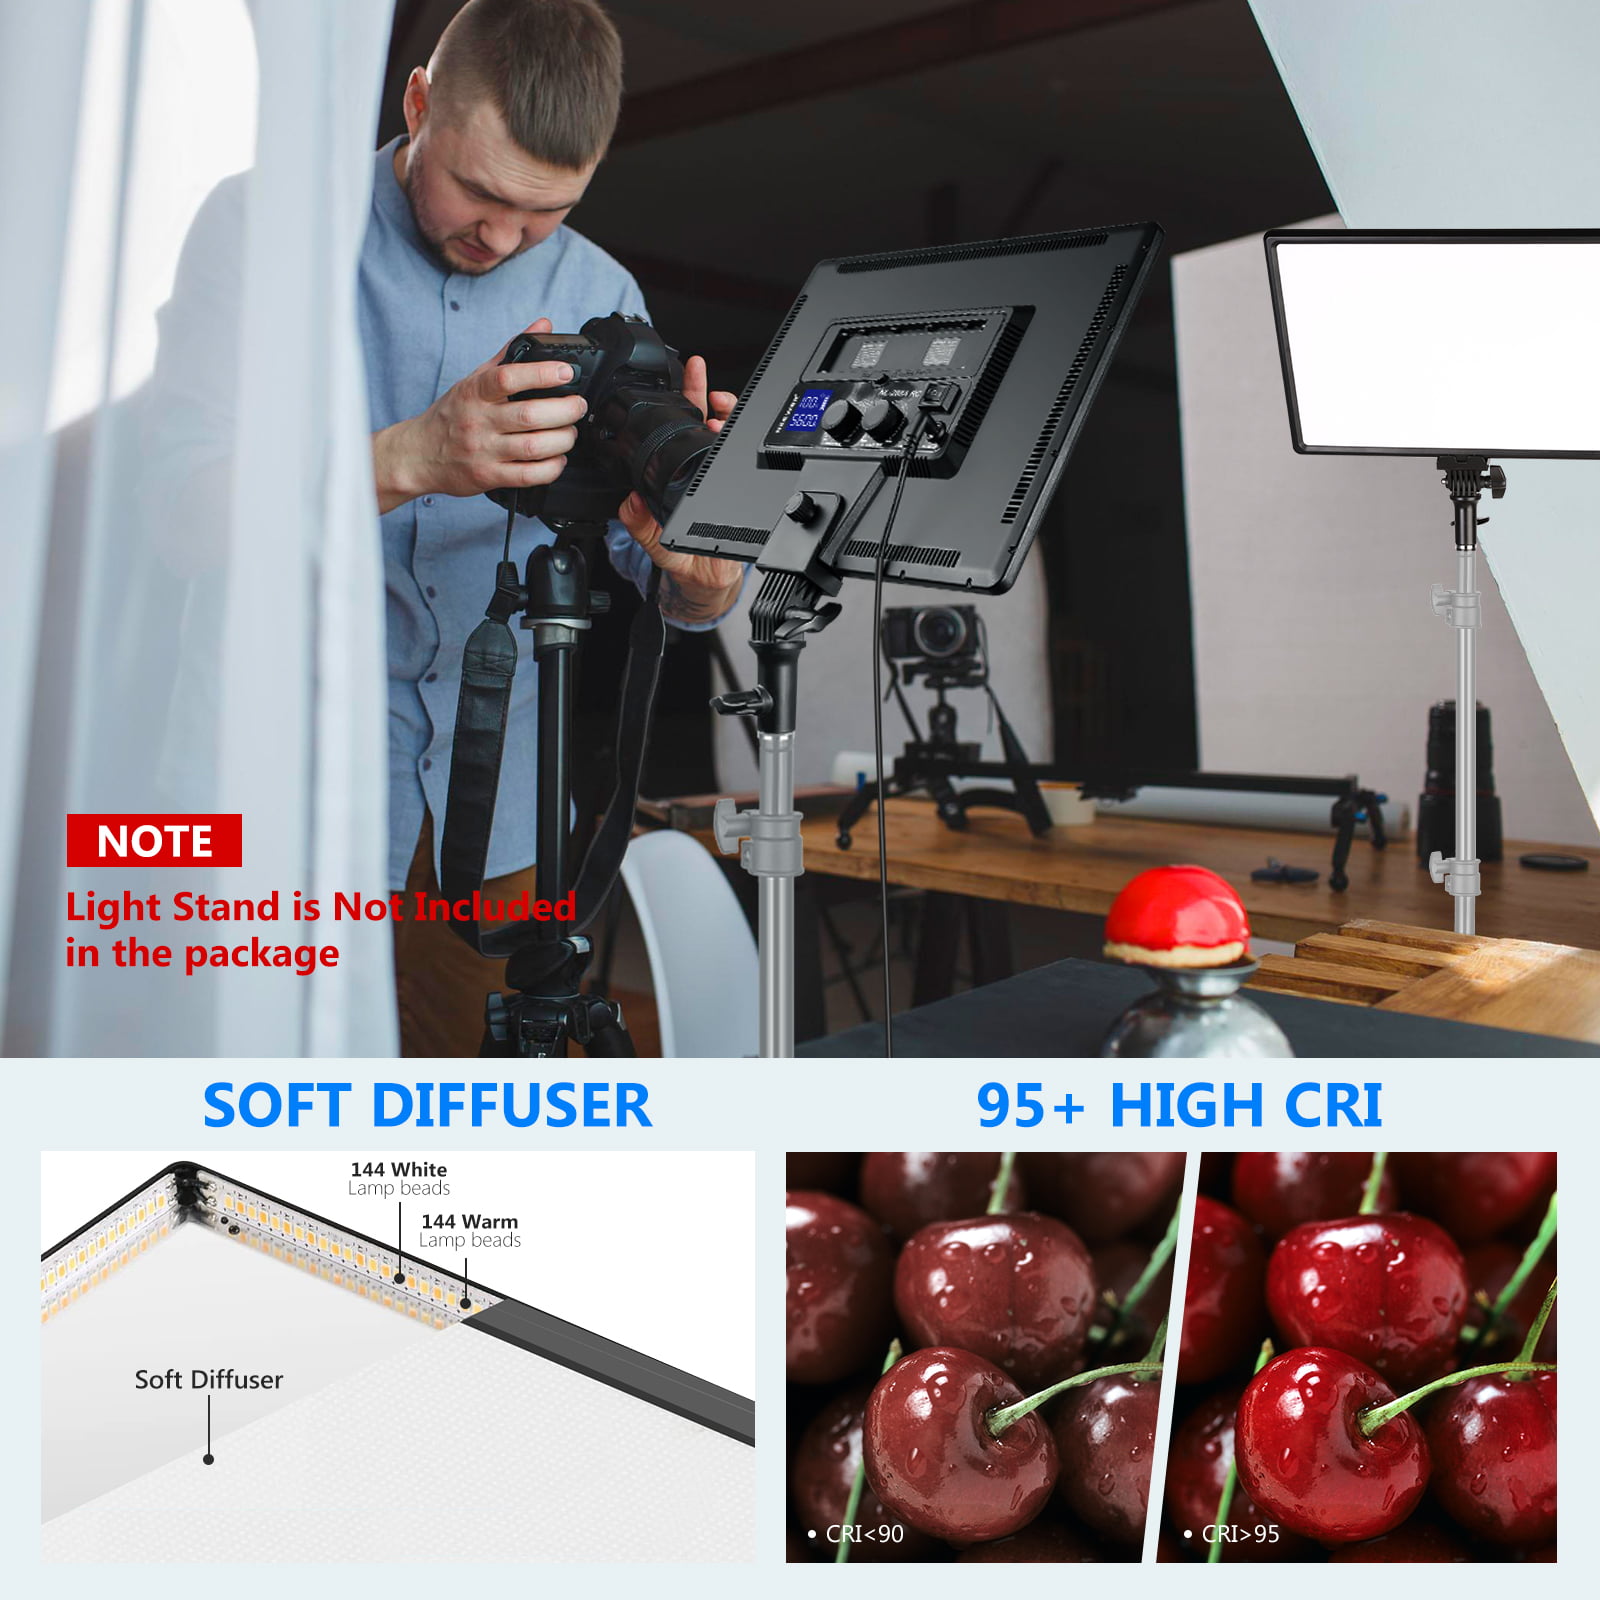 Battery Not Included Neewer 288 Large LED Video Light Panel with 2.4G Remote Control 45W 4800LM 3200K-5600K Bi-color Dimmable Soft LED Light for YouTube TikTok Game Video Live Stream Photography